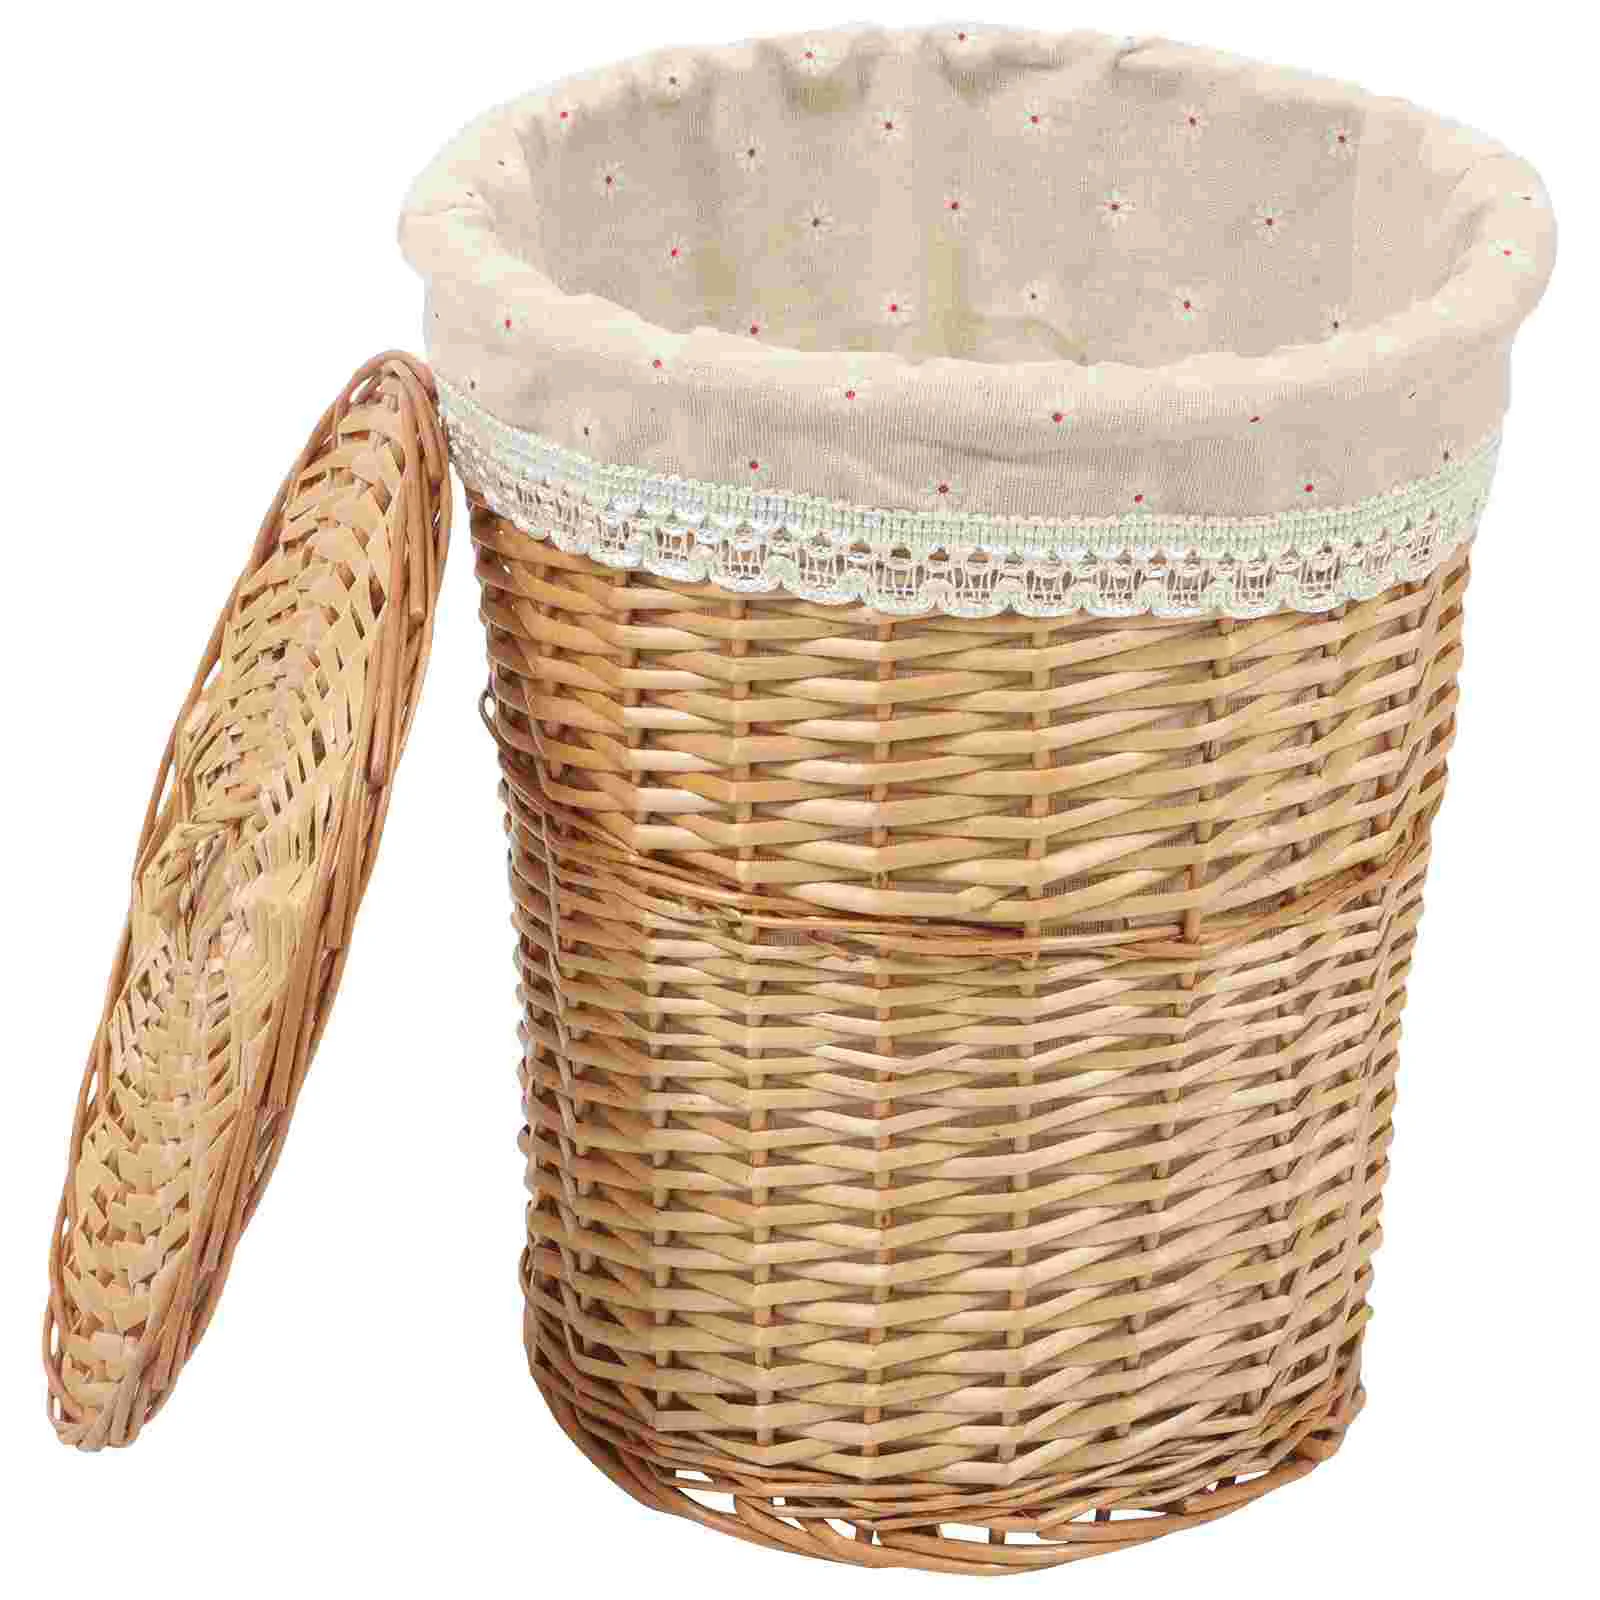 

Laundry Hamper With Lid Woven Storage Basket Sundries Makeup Organizing Household Home Container Toy Dirty Clothing Child